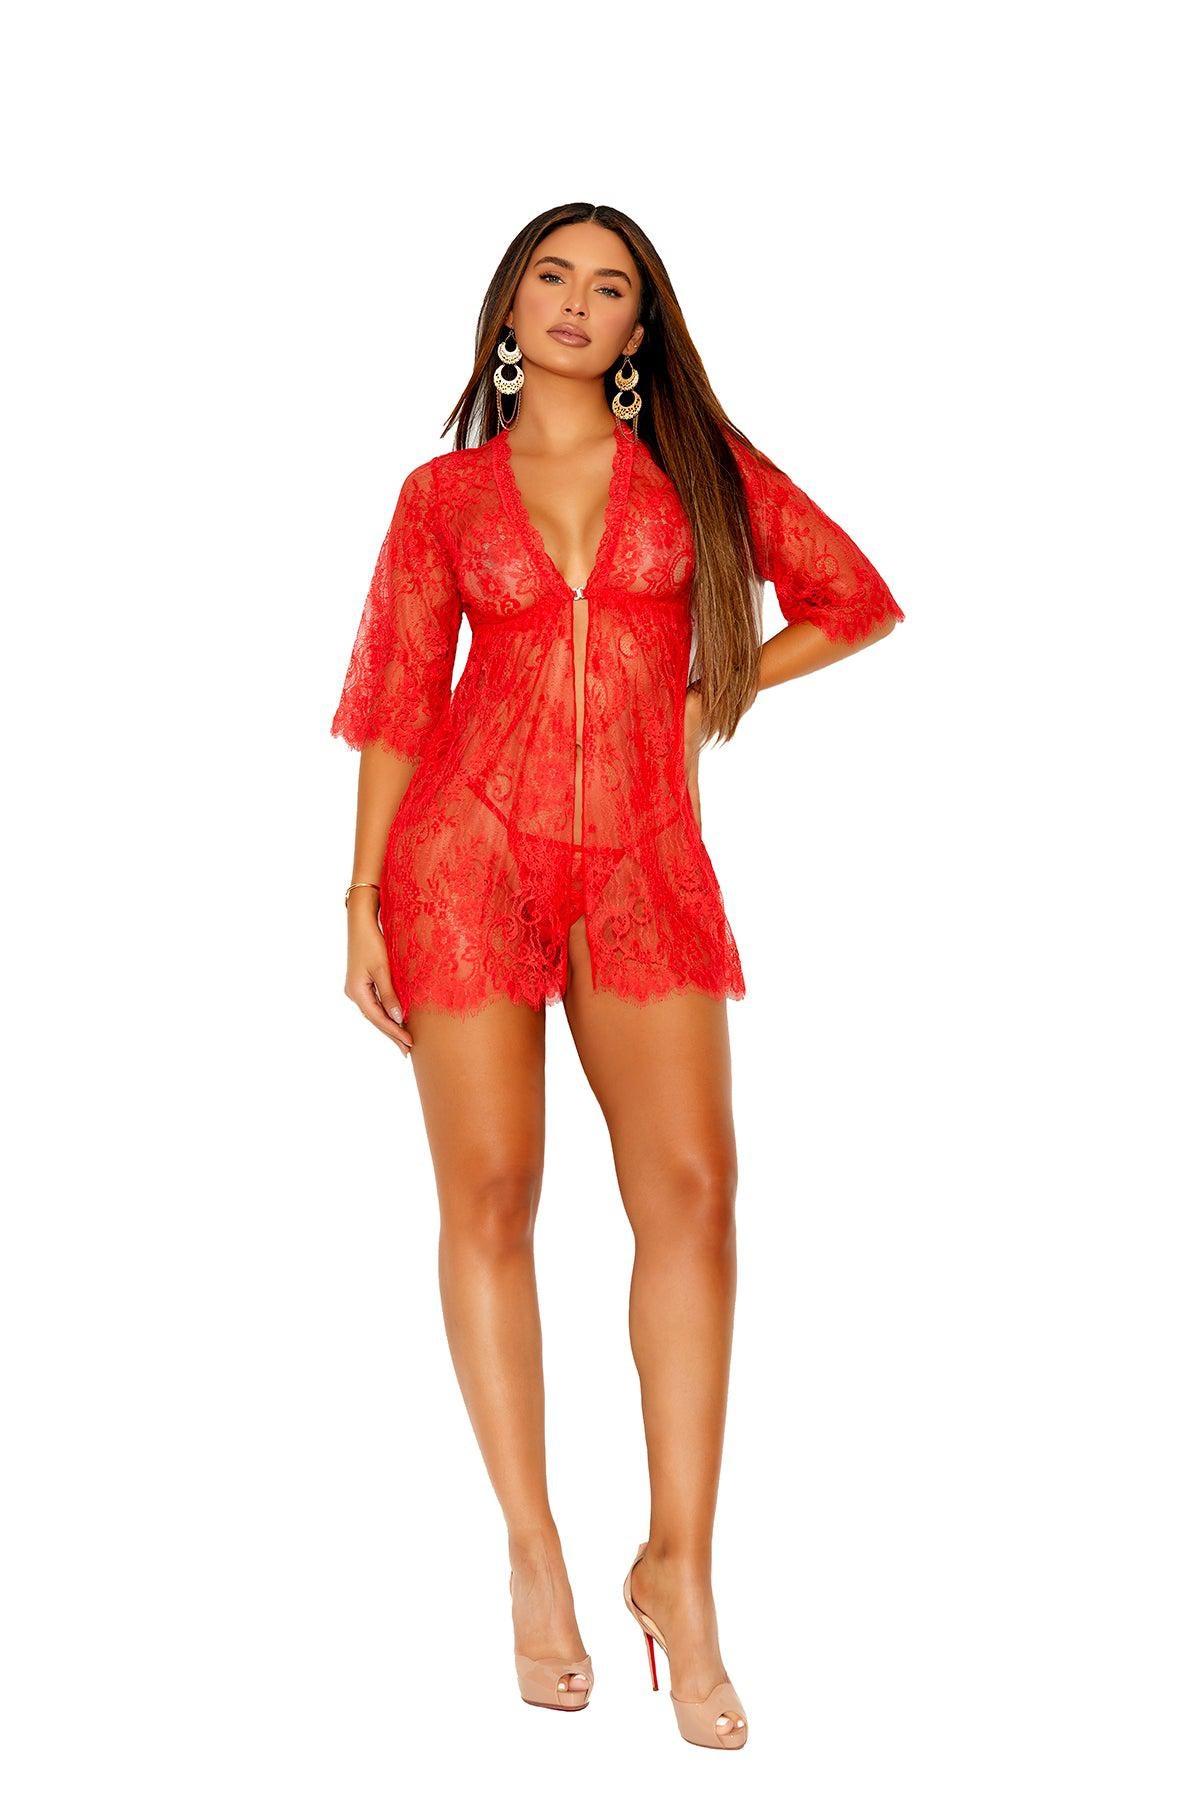 Red floral lace babydoll